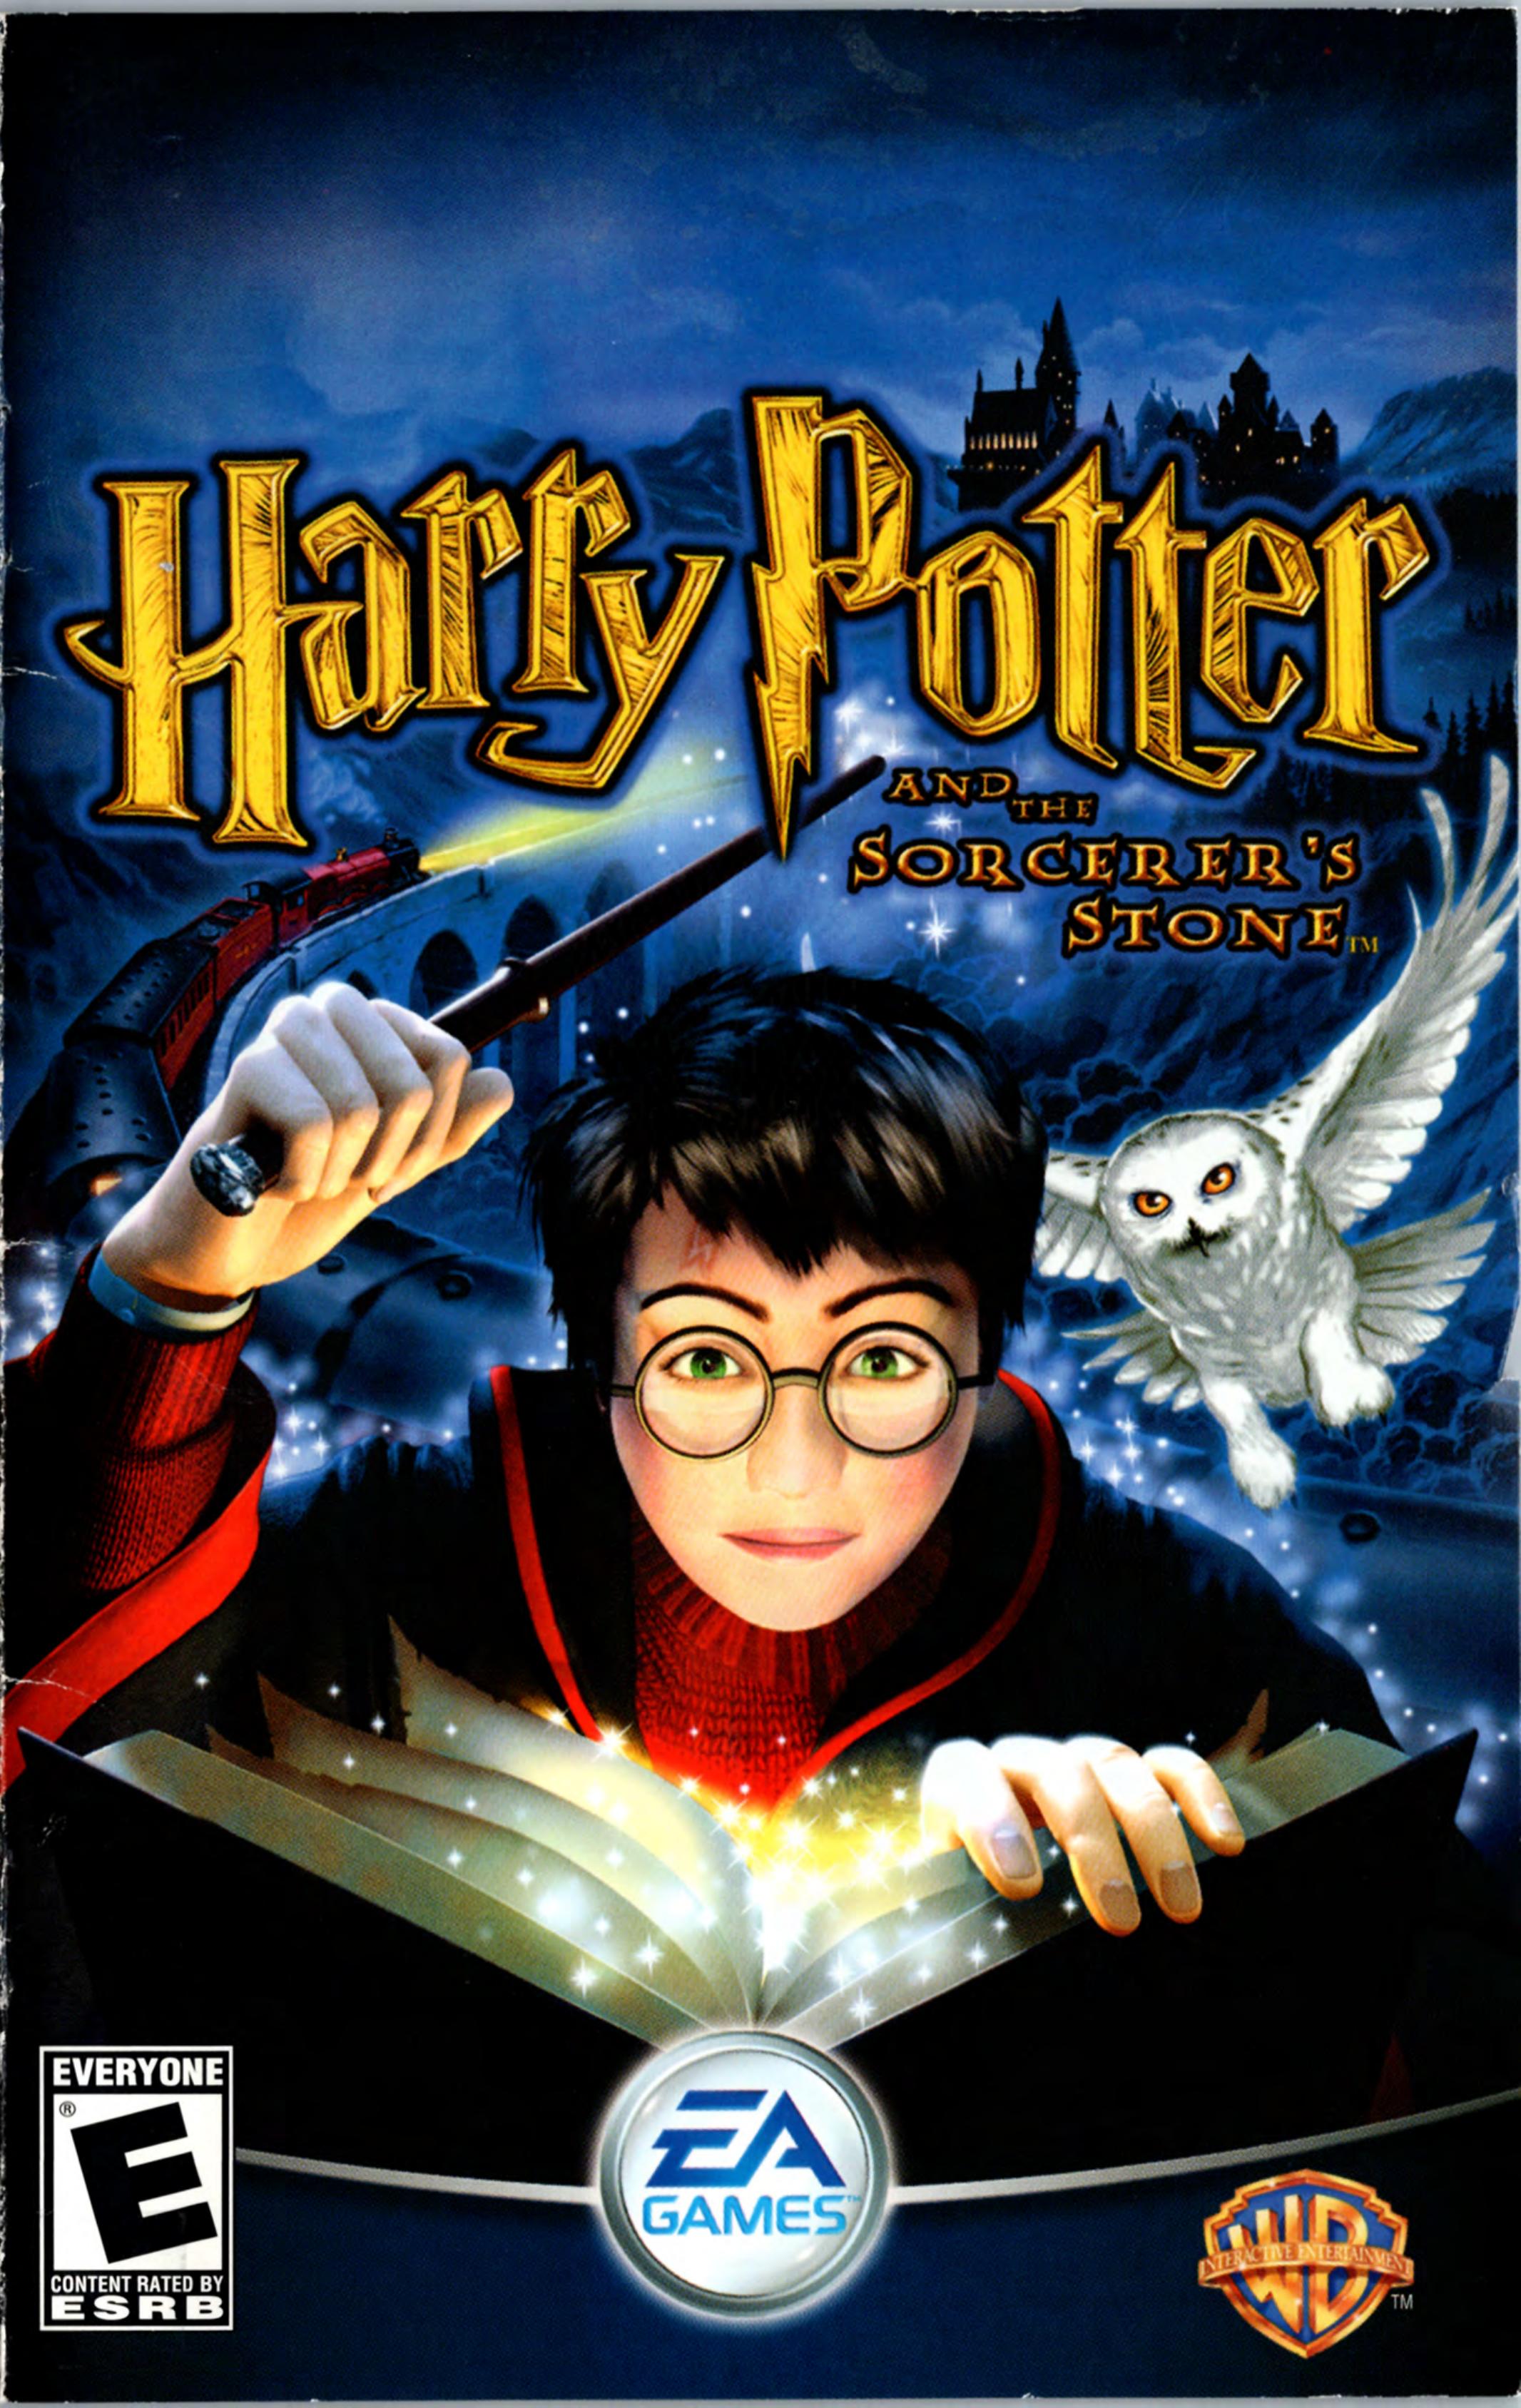 Harry Potter and the Sorcerer's Stone (USA) by Jonathan Grimm